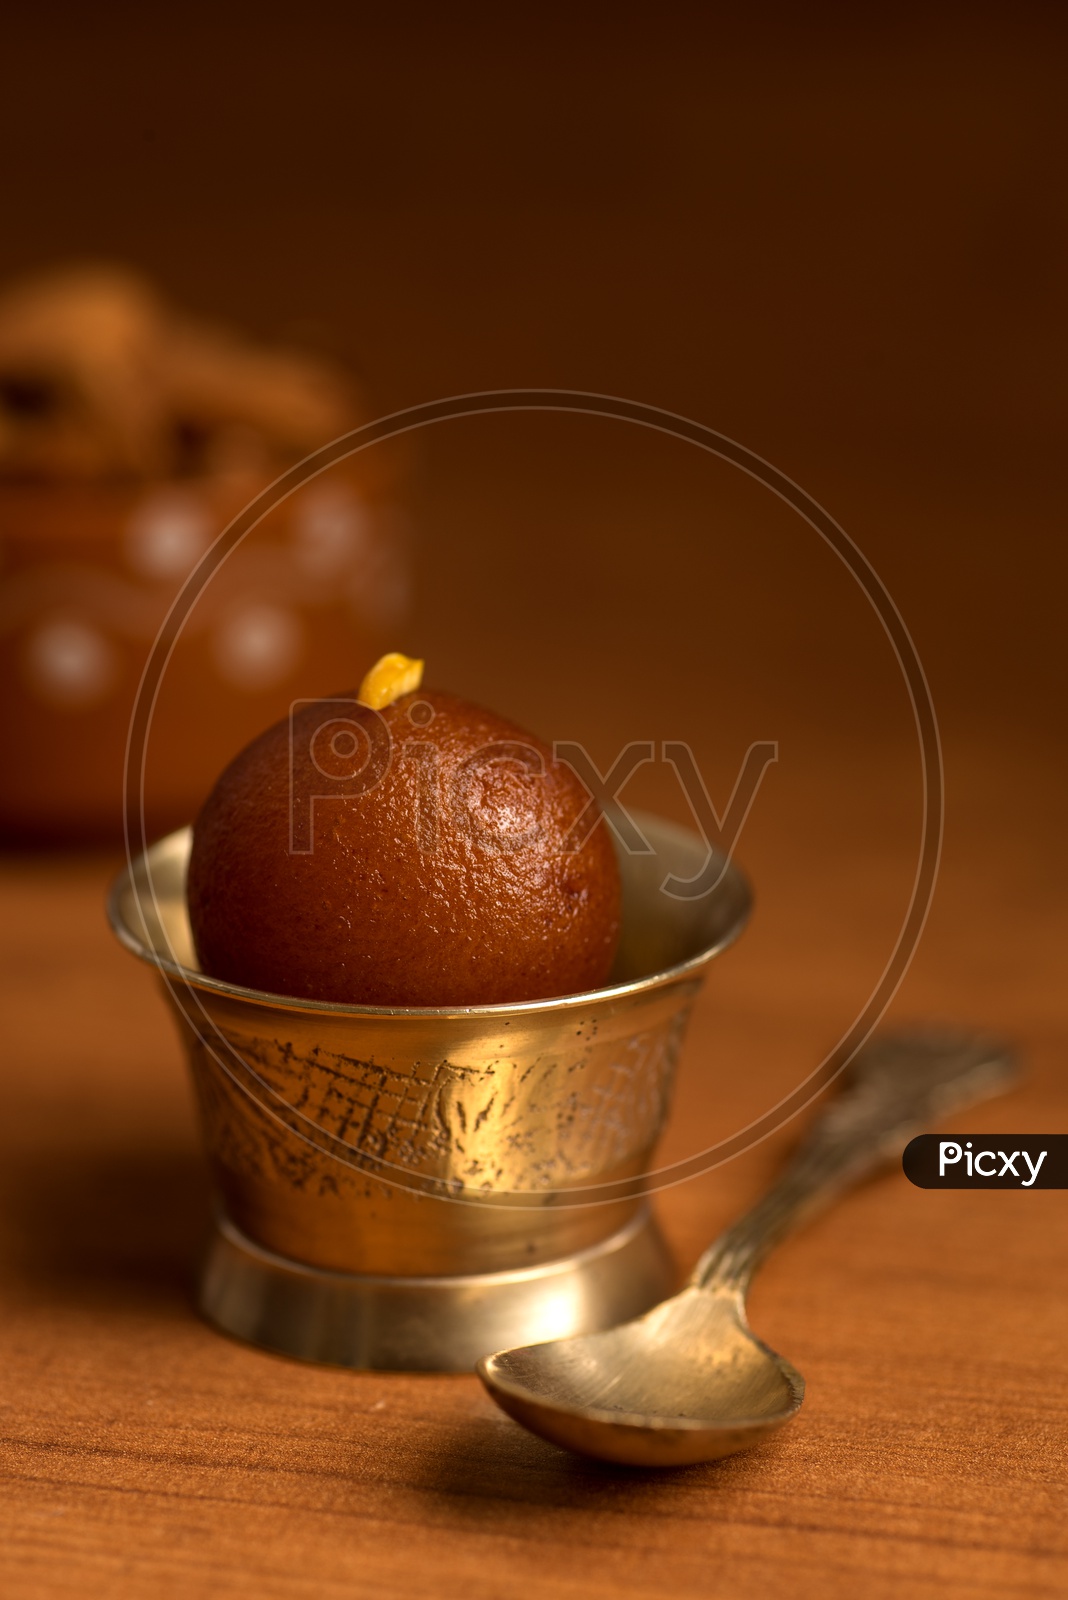 Indian Sweet or Dessert or Savoury Gulab Jamun  Served in an Elegant  Bowl with Spoon  On an Isolated Wooden Background